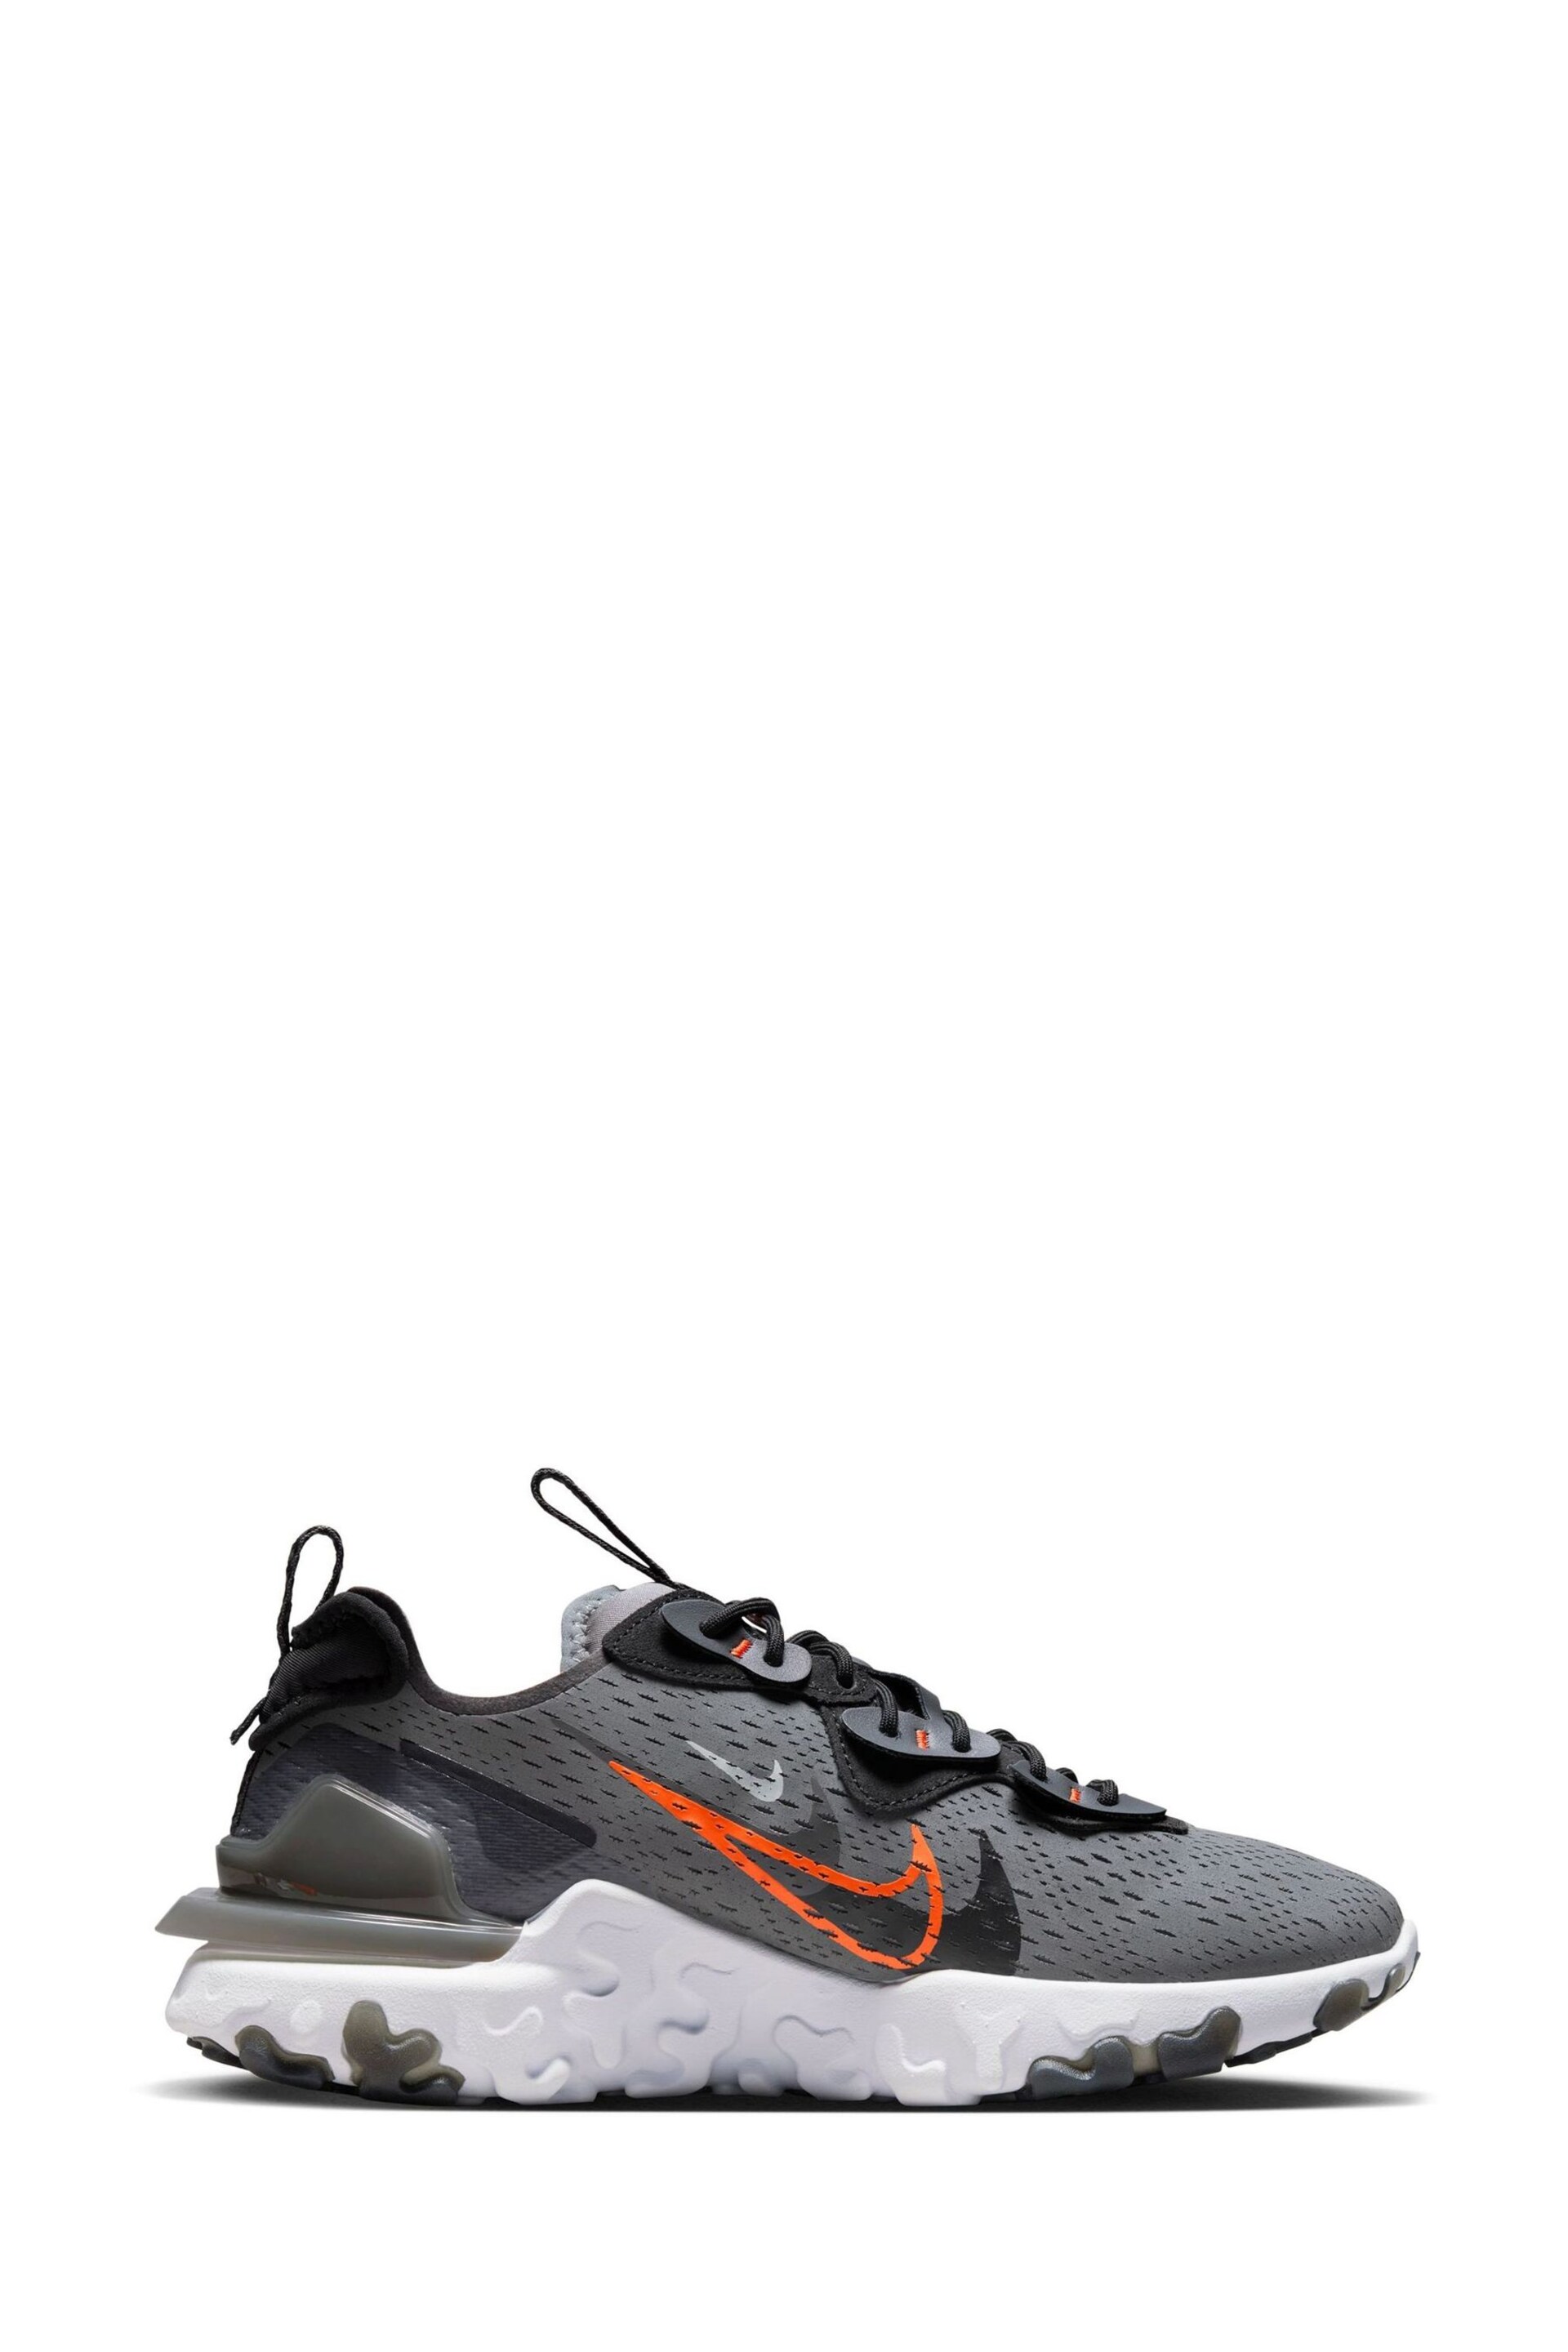 Nike Grey React Vision Trainers - Image 3 of 10